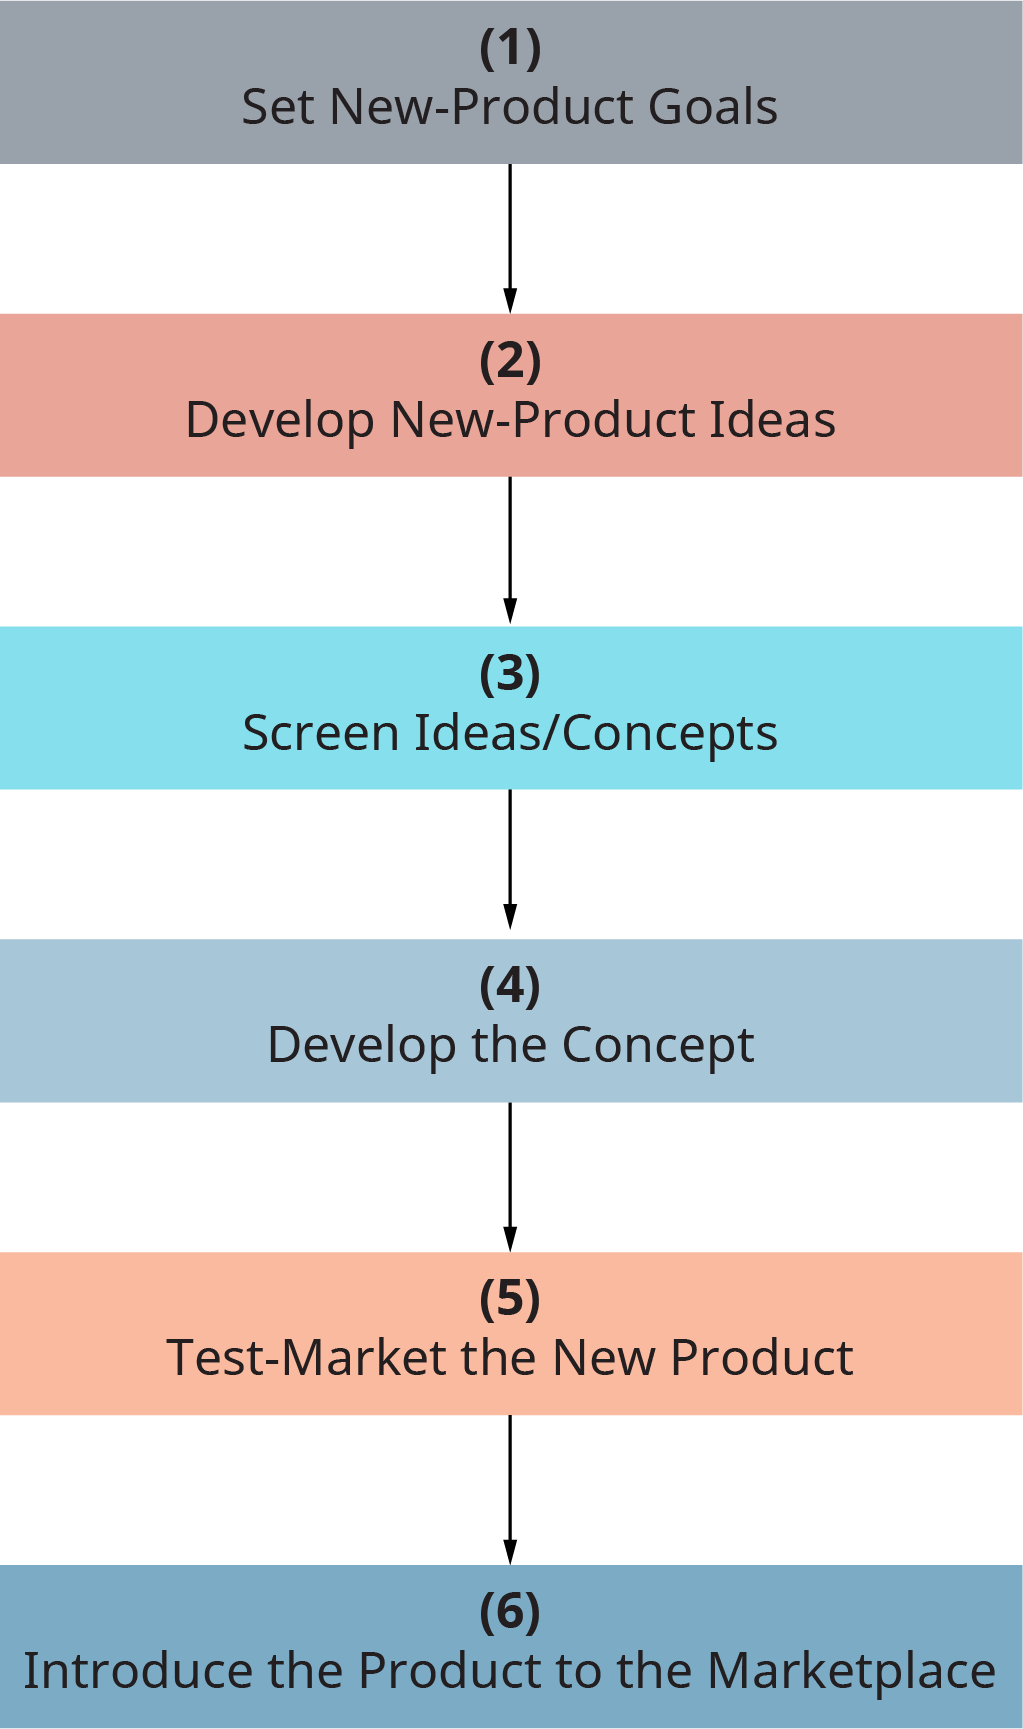 Each step flows into the next. Step 1, set new product goals. Step 2, develop new product ideas. Step 3, Screen ideas slash concepts. Step 4, develop the concept. Step 5, test market the new product. Step 6, introduce the product to the marketplace.